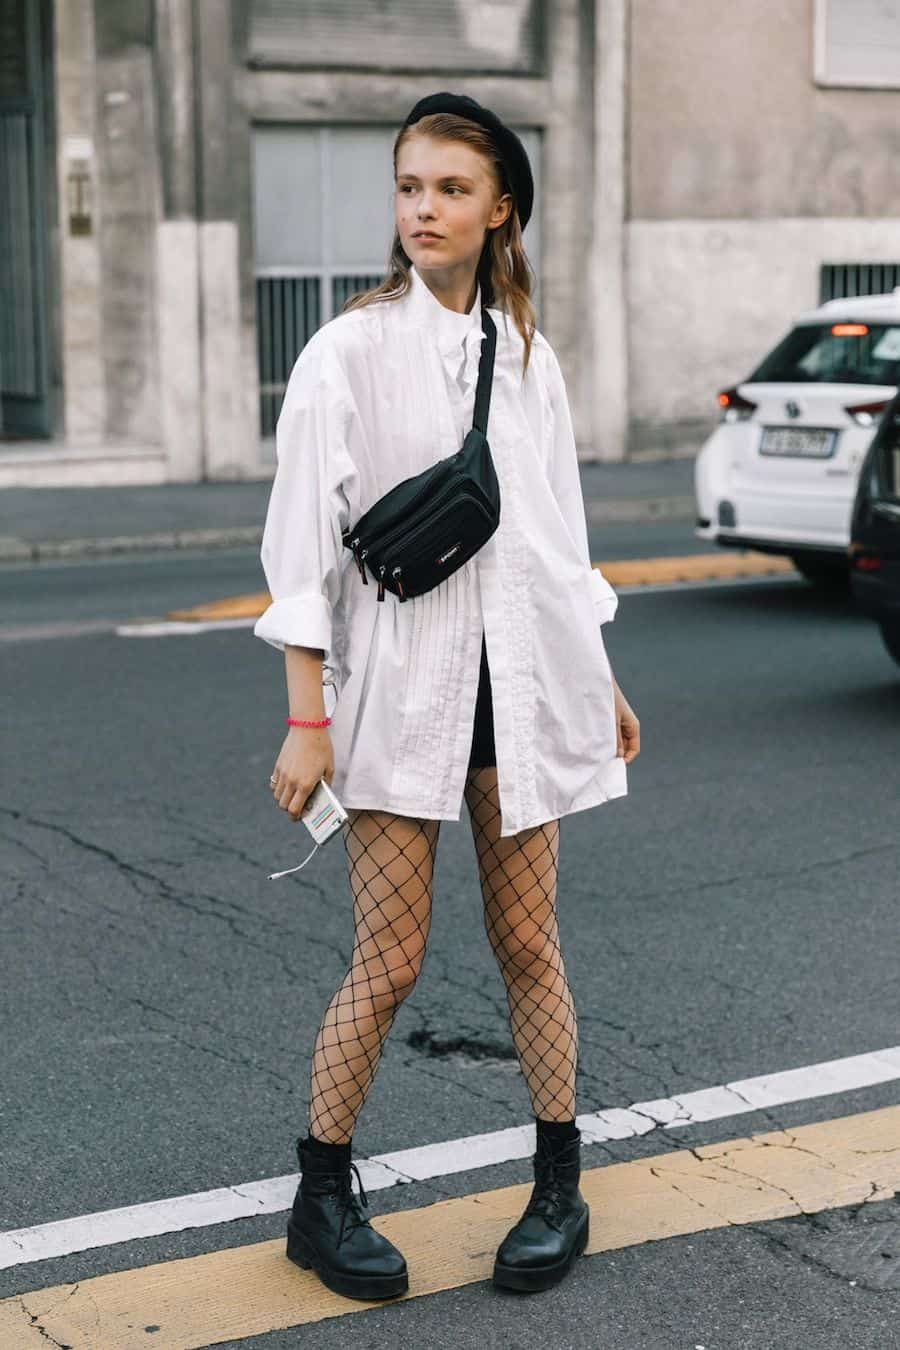 image of a woman wearing a long oversized white button up shirt, shorts, and fishnet stockings